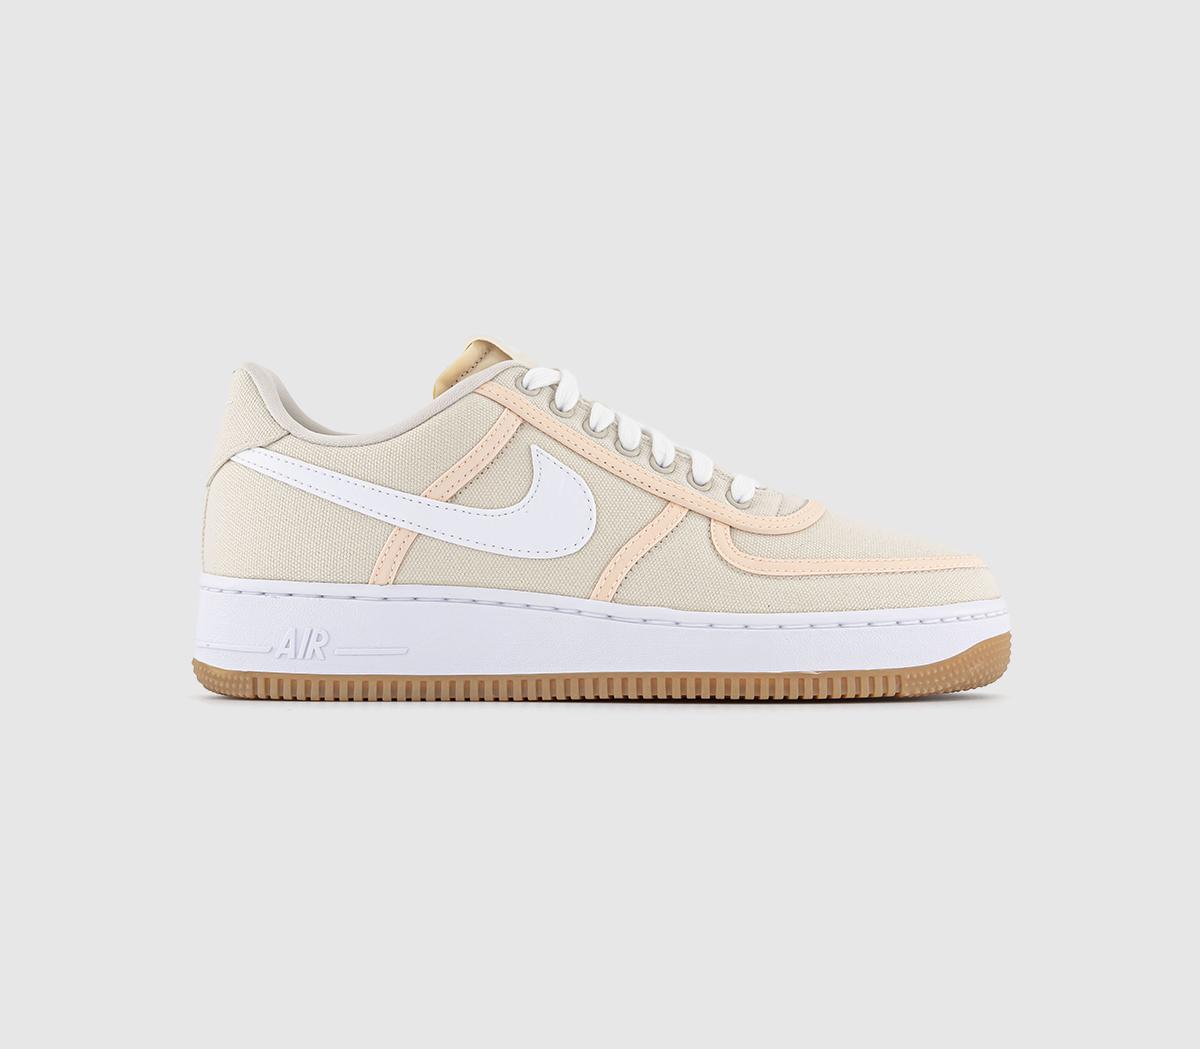 Nike Air Force 1 07 Trainers Light Cream White Crimson Tint Gum Light Brown In Natural